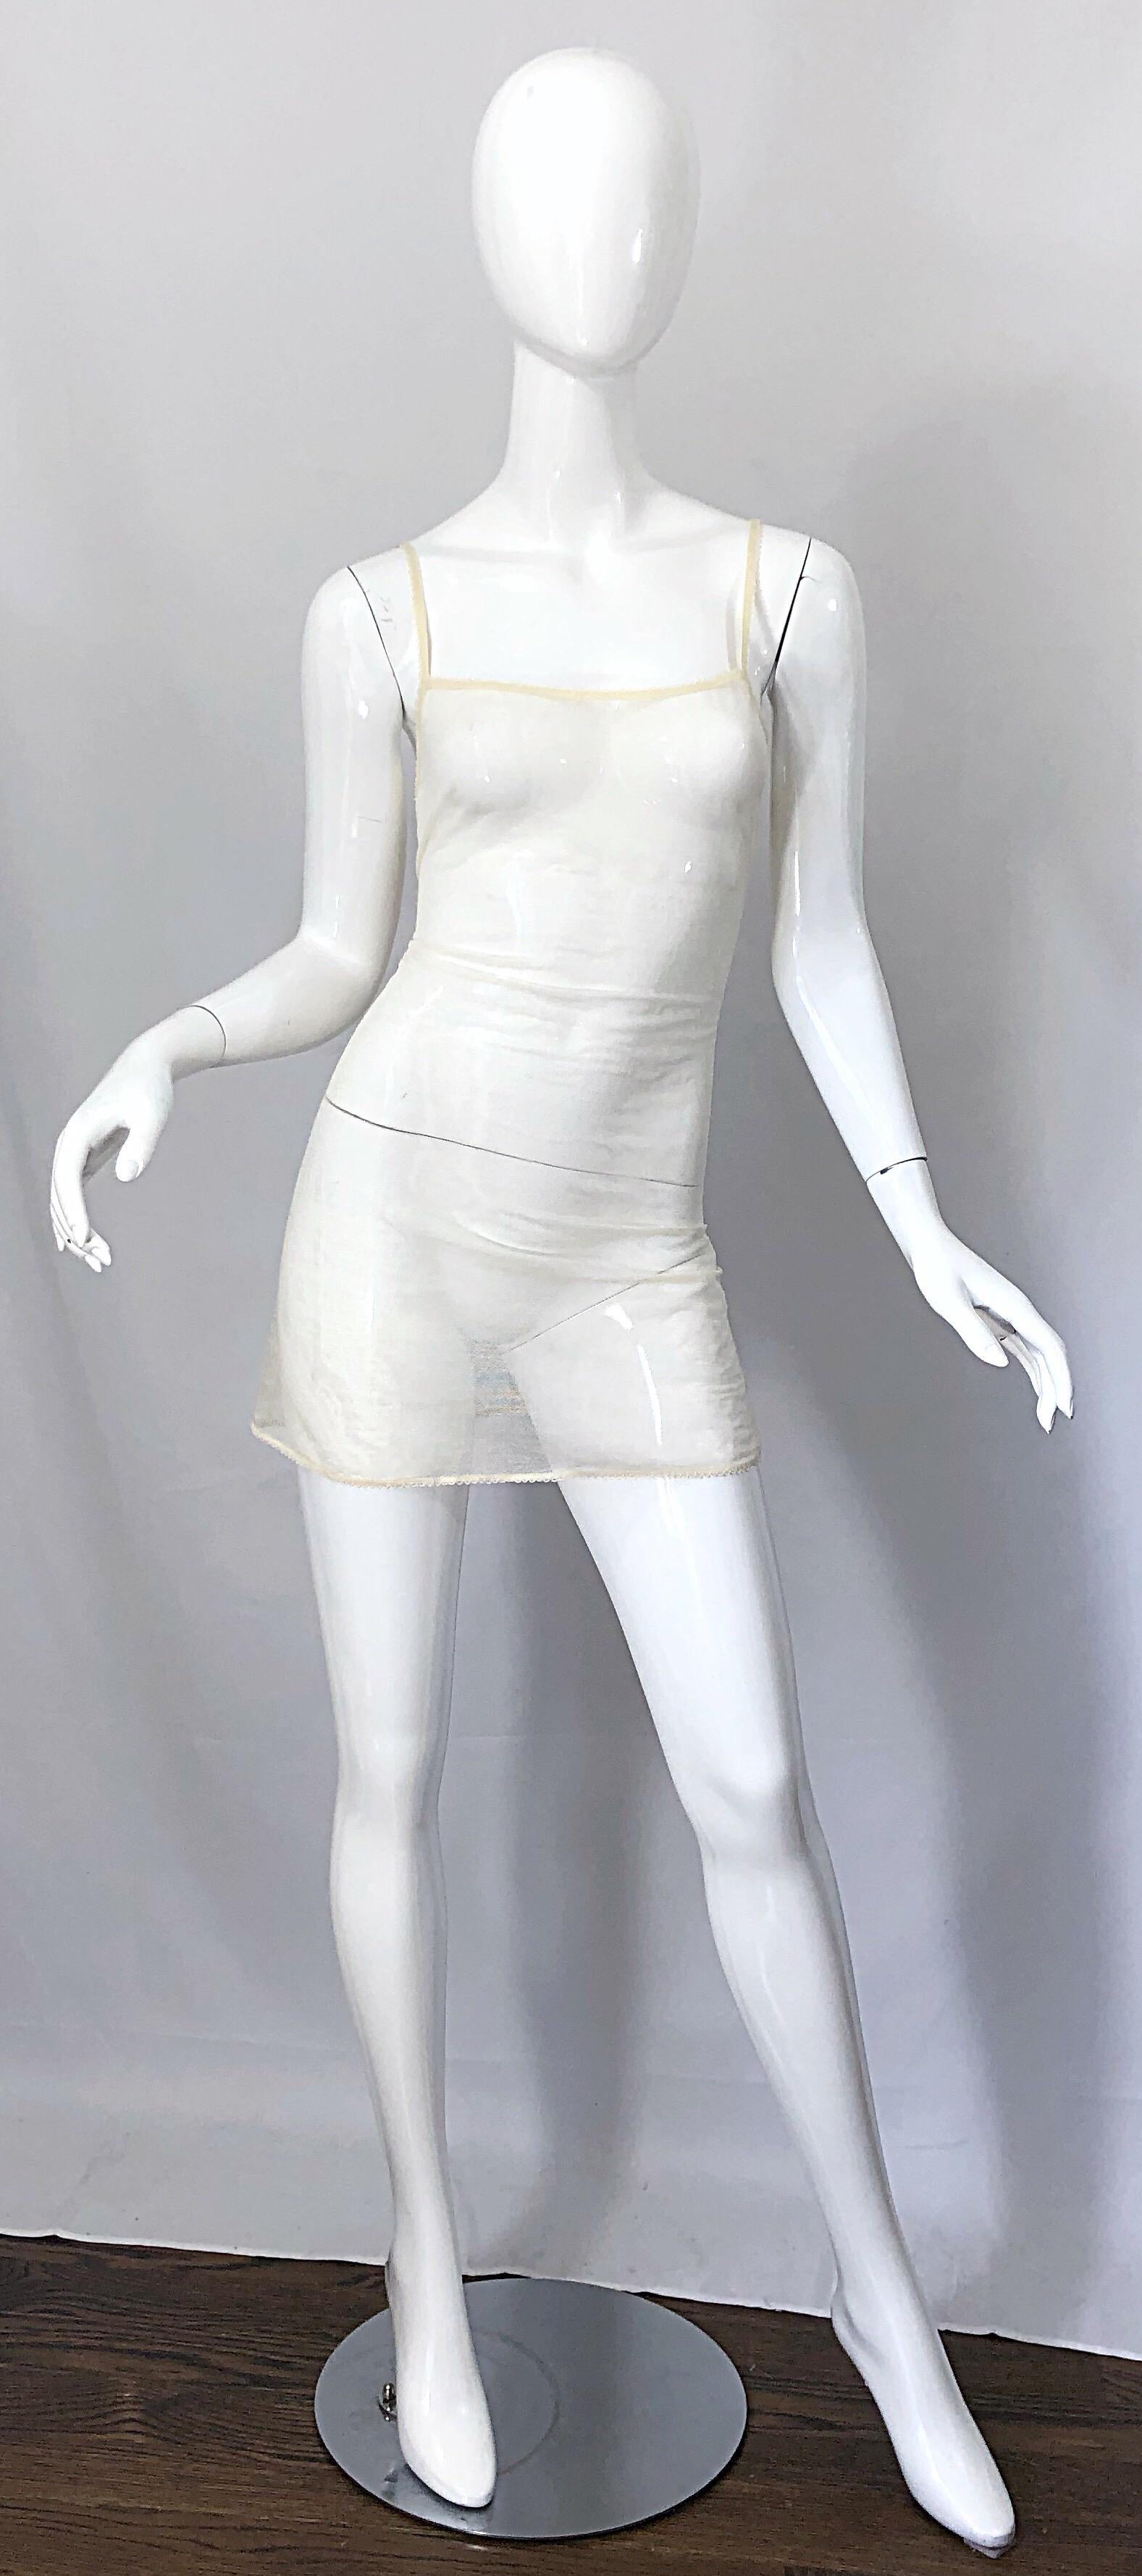 Sexy brand new with tags CHANEL, by KARL LAGERFELD, ivory off - white sheer silk mesh mini slip dress! Simply slips over the head, and stretches to fit. Lace hem and trim / straps. In great unworn condition, with tags and extra fabric still